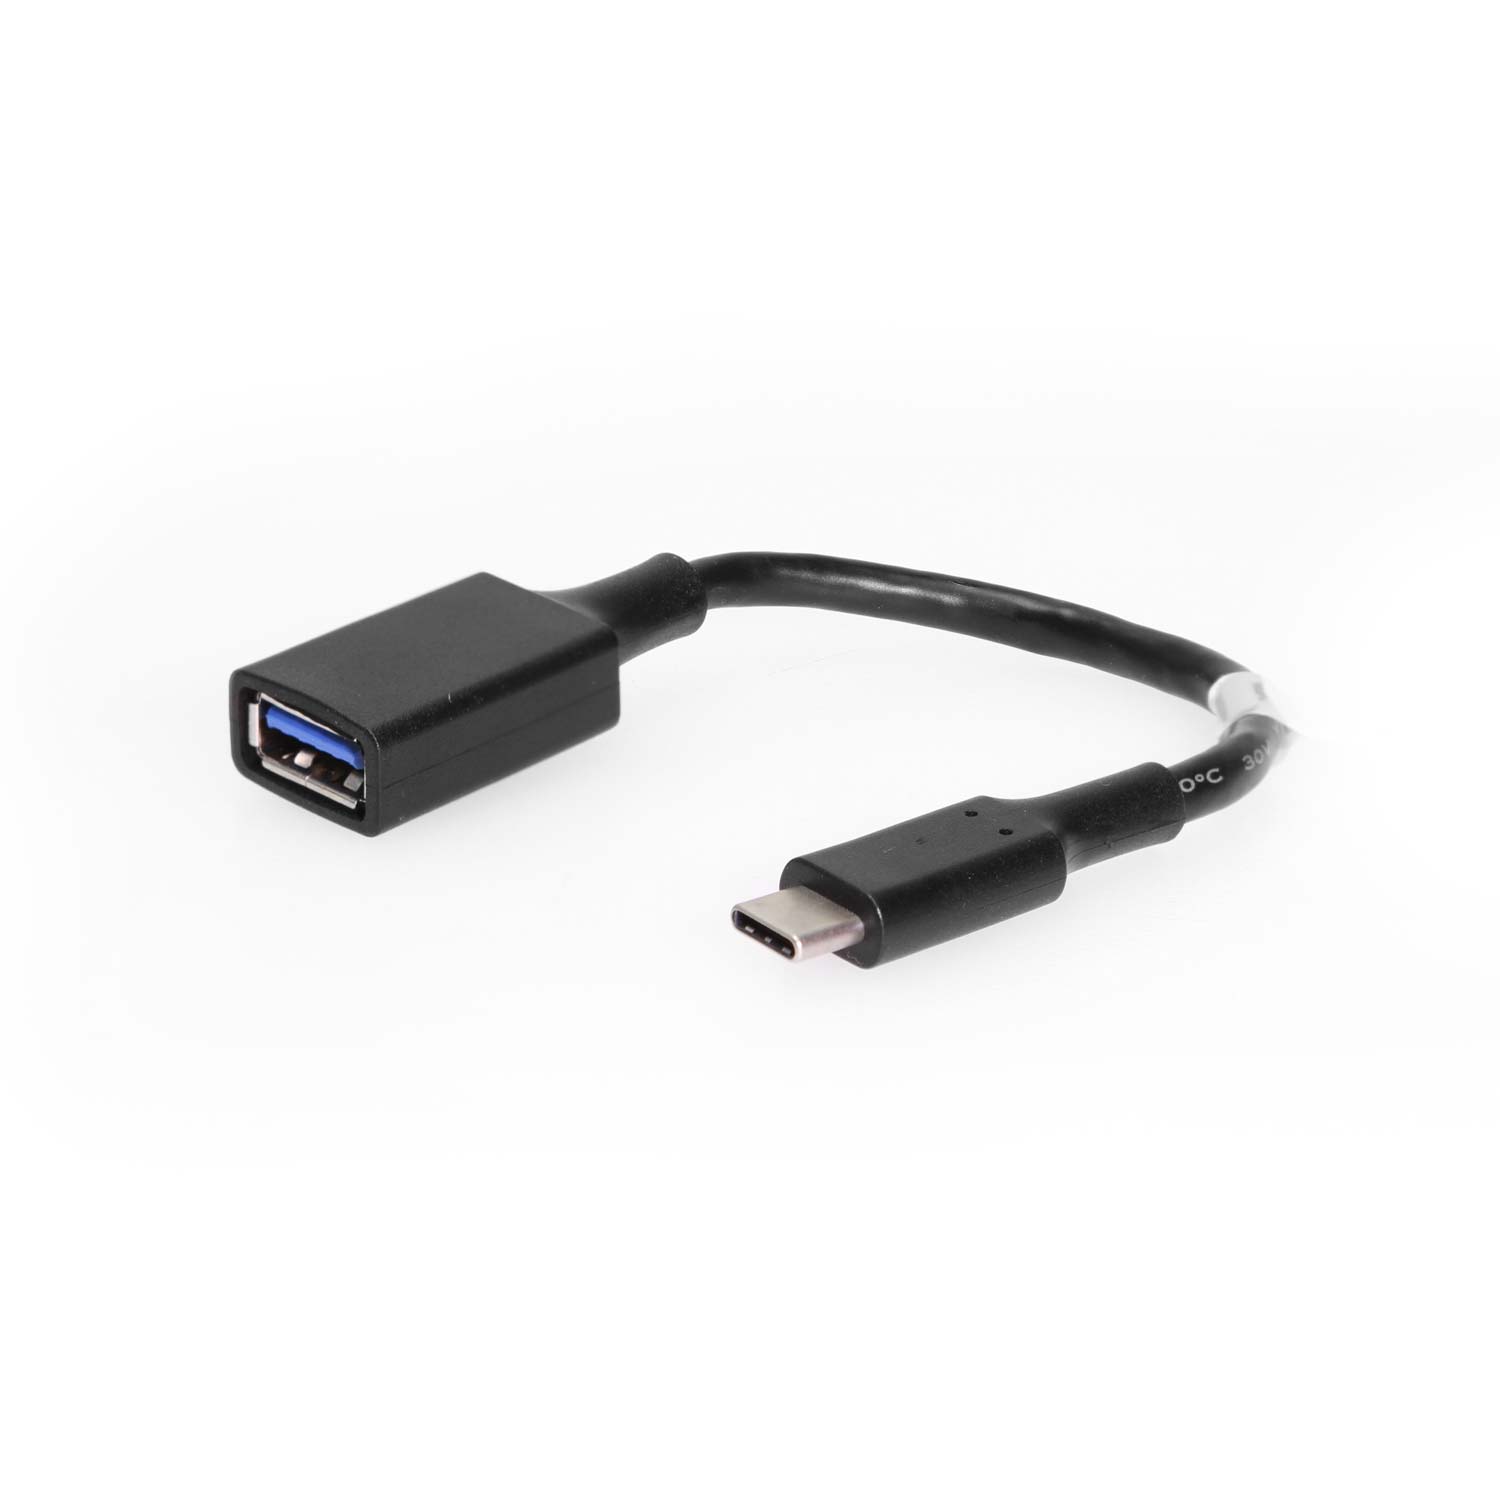 Coolgear USB 3.2 Gen 1 Type-C Male to Type-A Female Adapter Cable 6in.